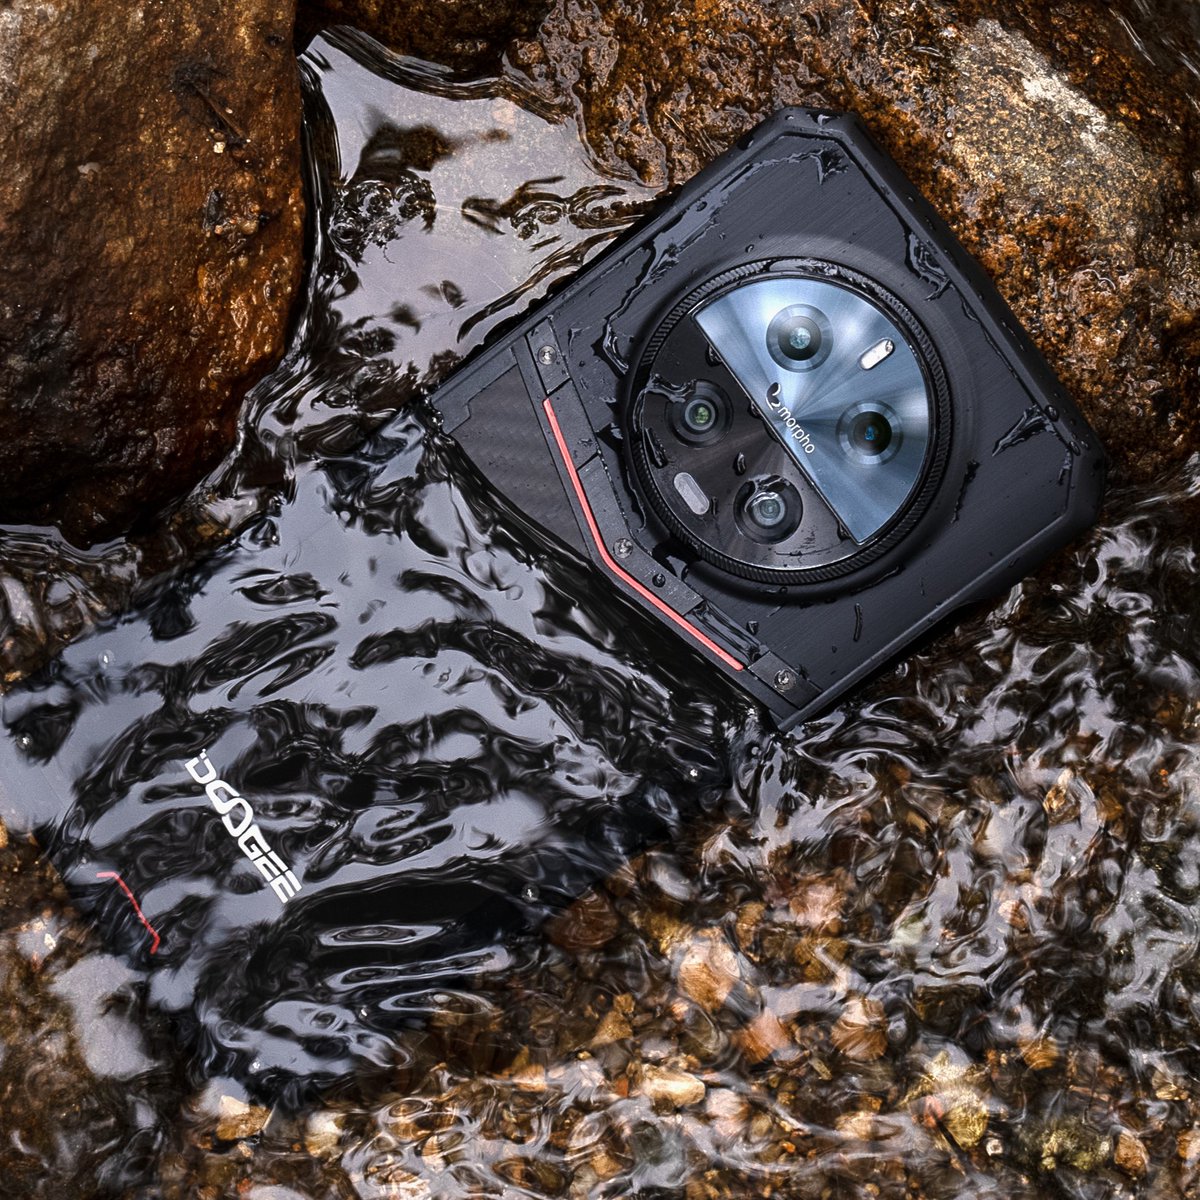 Close your eyes and remember the feeling of dipping your hand into a refreshing mountain spring🏞️💧 Let's chase that feeling again with #DoogeeDK10 by your side! 

Learn more: bit.ly/3xaJWVj

#DOOGEE #ruggedphone #bestbuy #outdoorliving #outdoorlife #getoutdoors